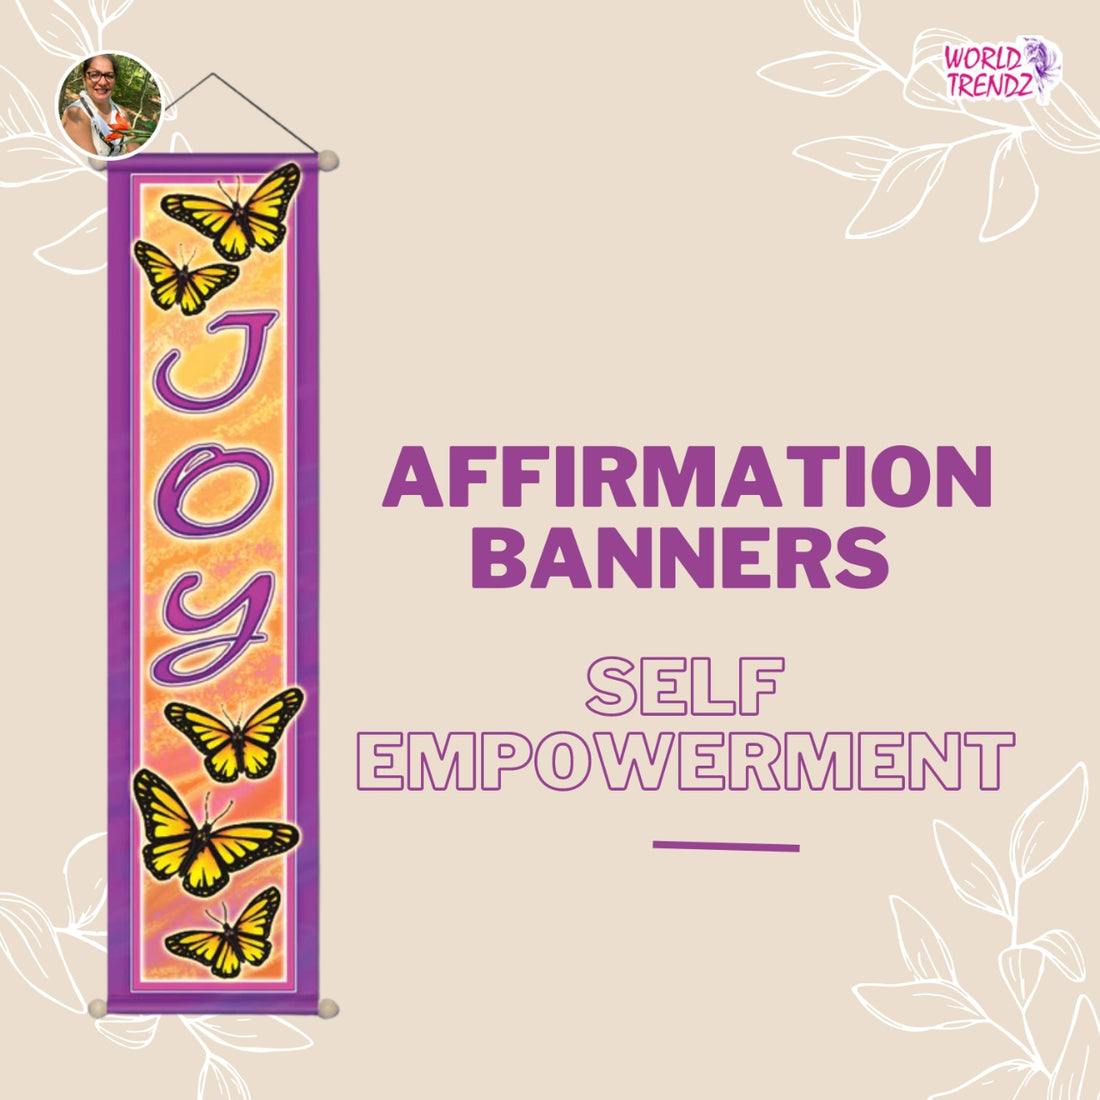 Why You Need Affirmation Banners